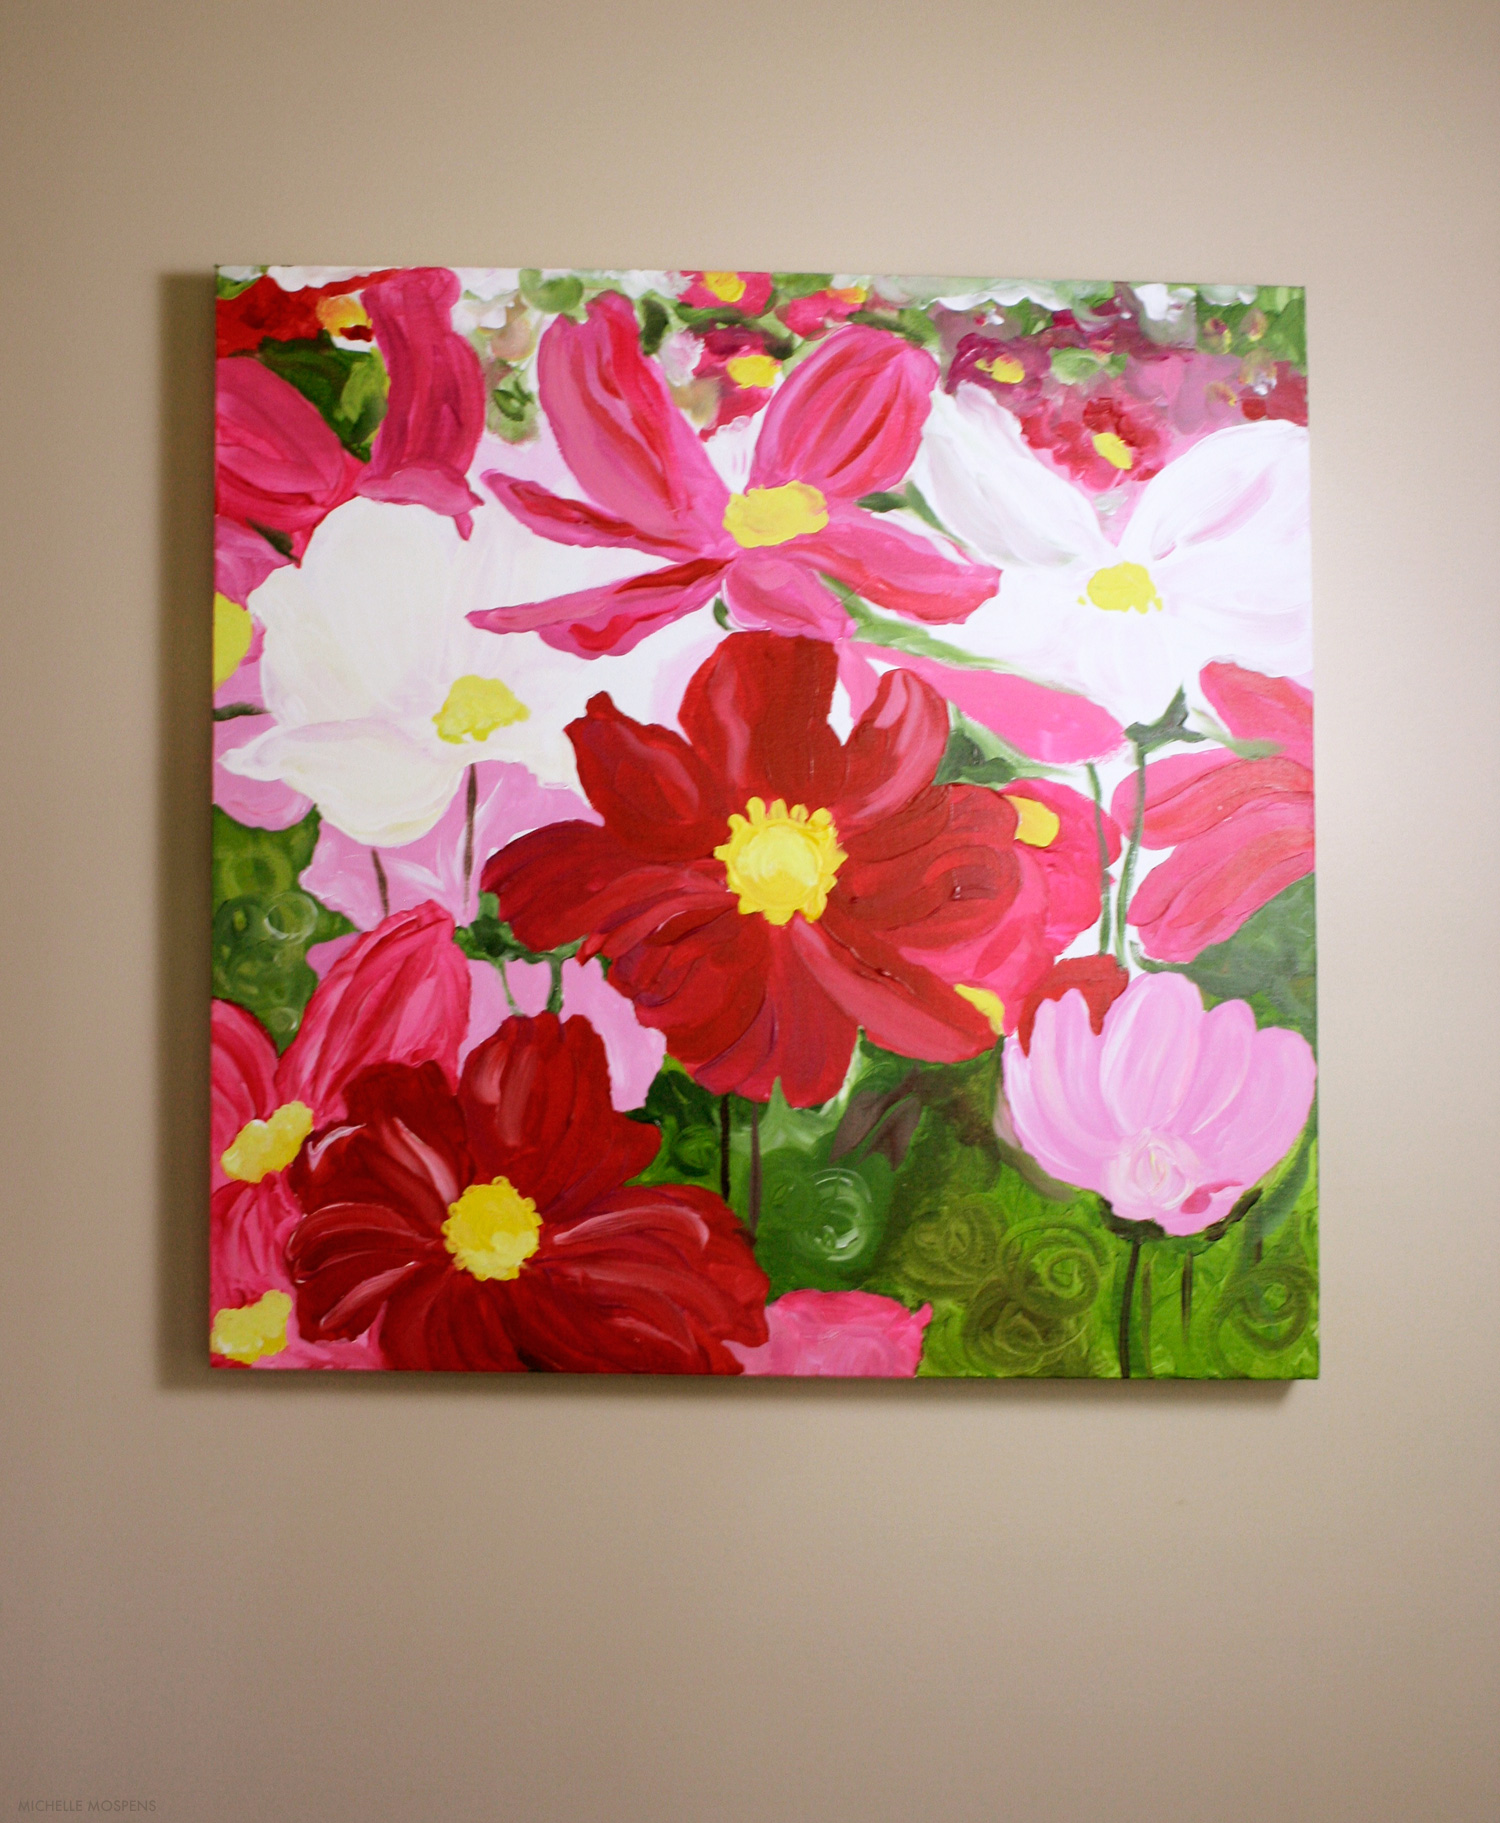 'In Open Fields' original wall art painting with daisies by Michelle Mospens | www.mospensstudio.com